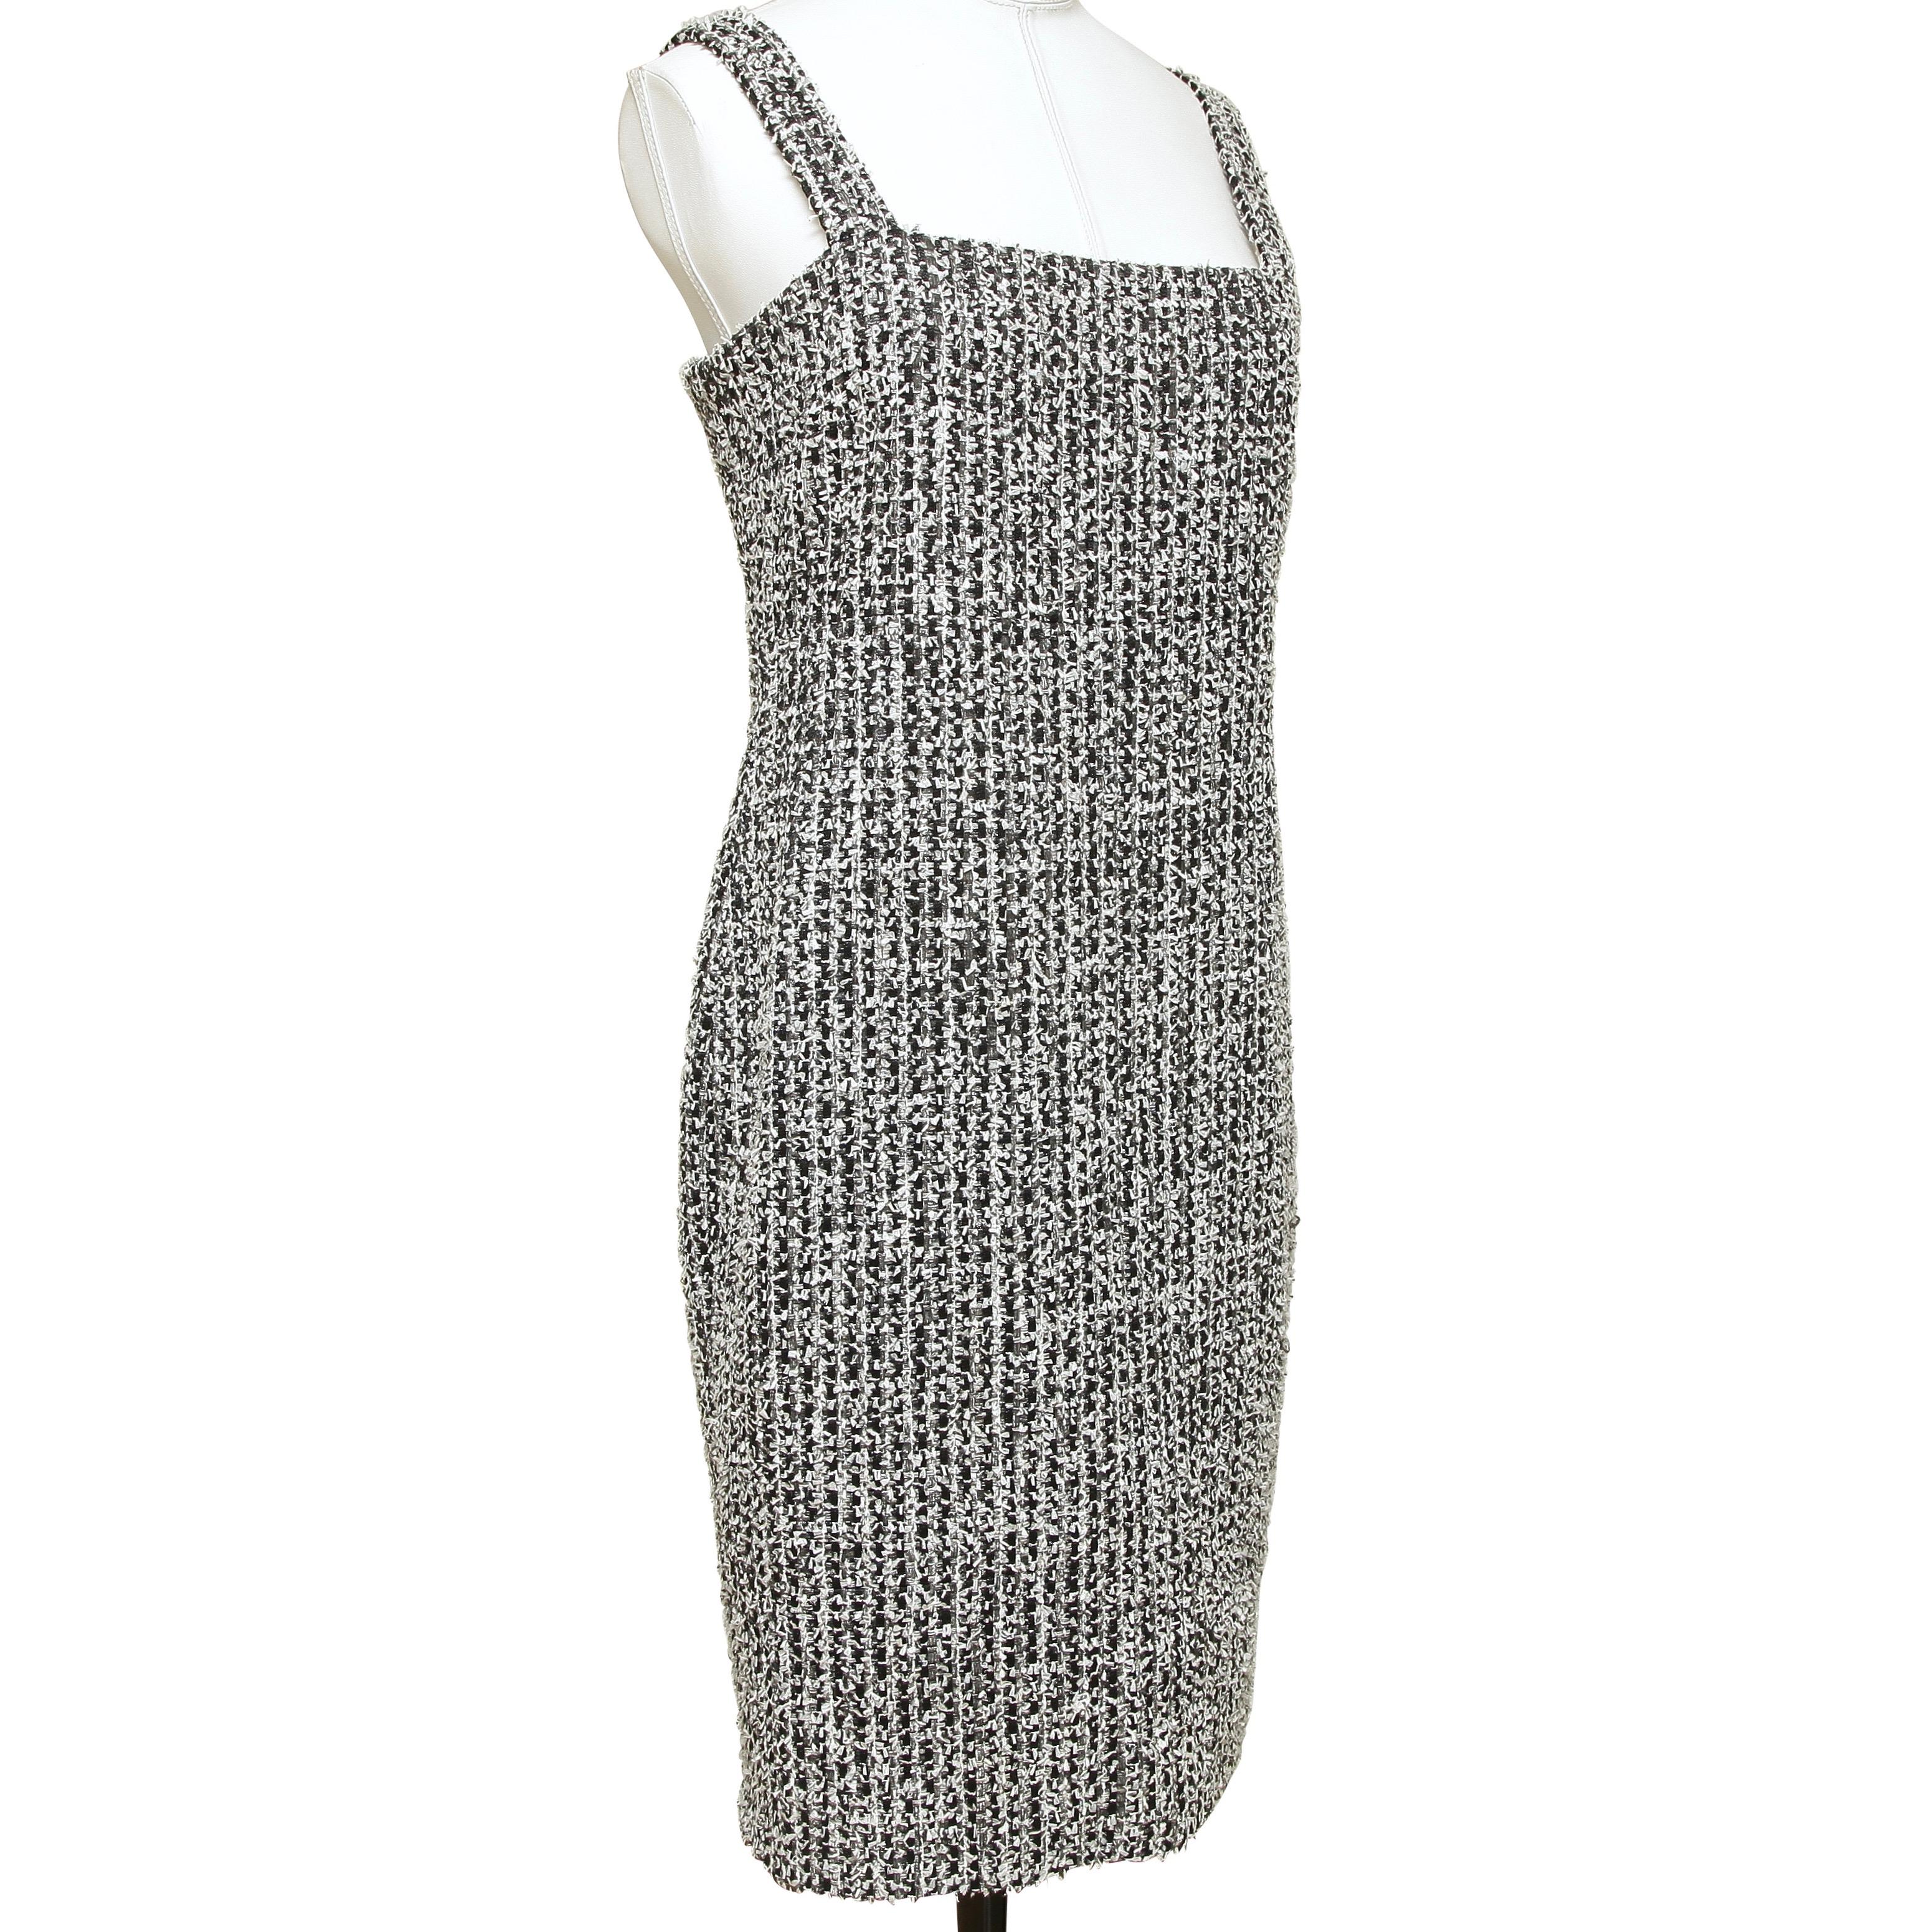 GUARANTEED AUTHENTIC CHANEL SPRING 2014 FANTASY TWEED SLEEVELESS DRESS

 

Design:
- Black white fantasy tweed shift style dress.
- Sleeveless.
- Square neckline.
- Rear covered full zipper closure.
- Rear vent at hemline.
- Lined.

Material:
- 77%